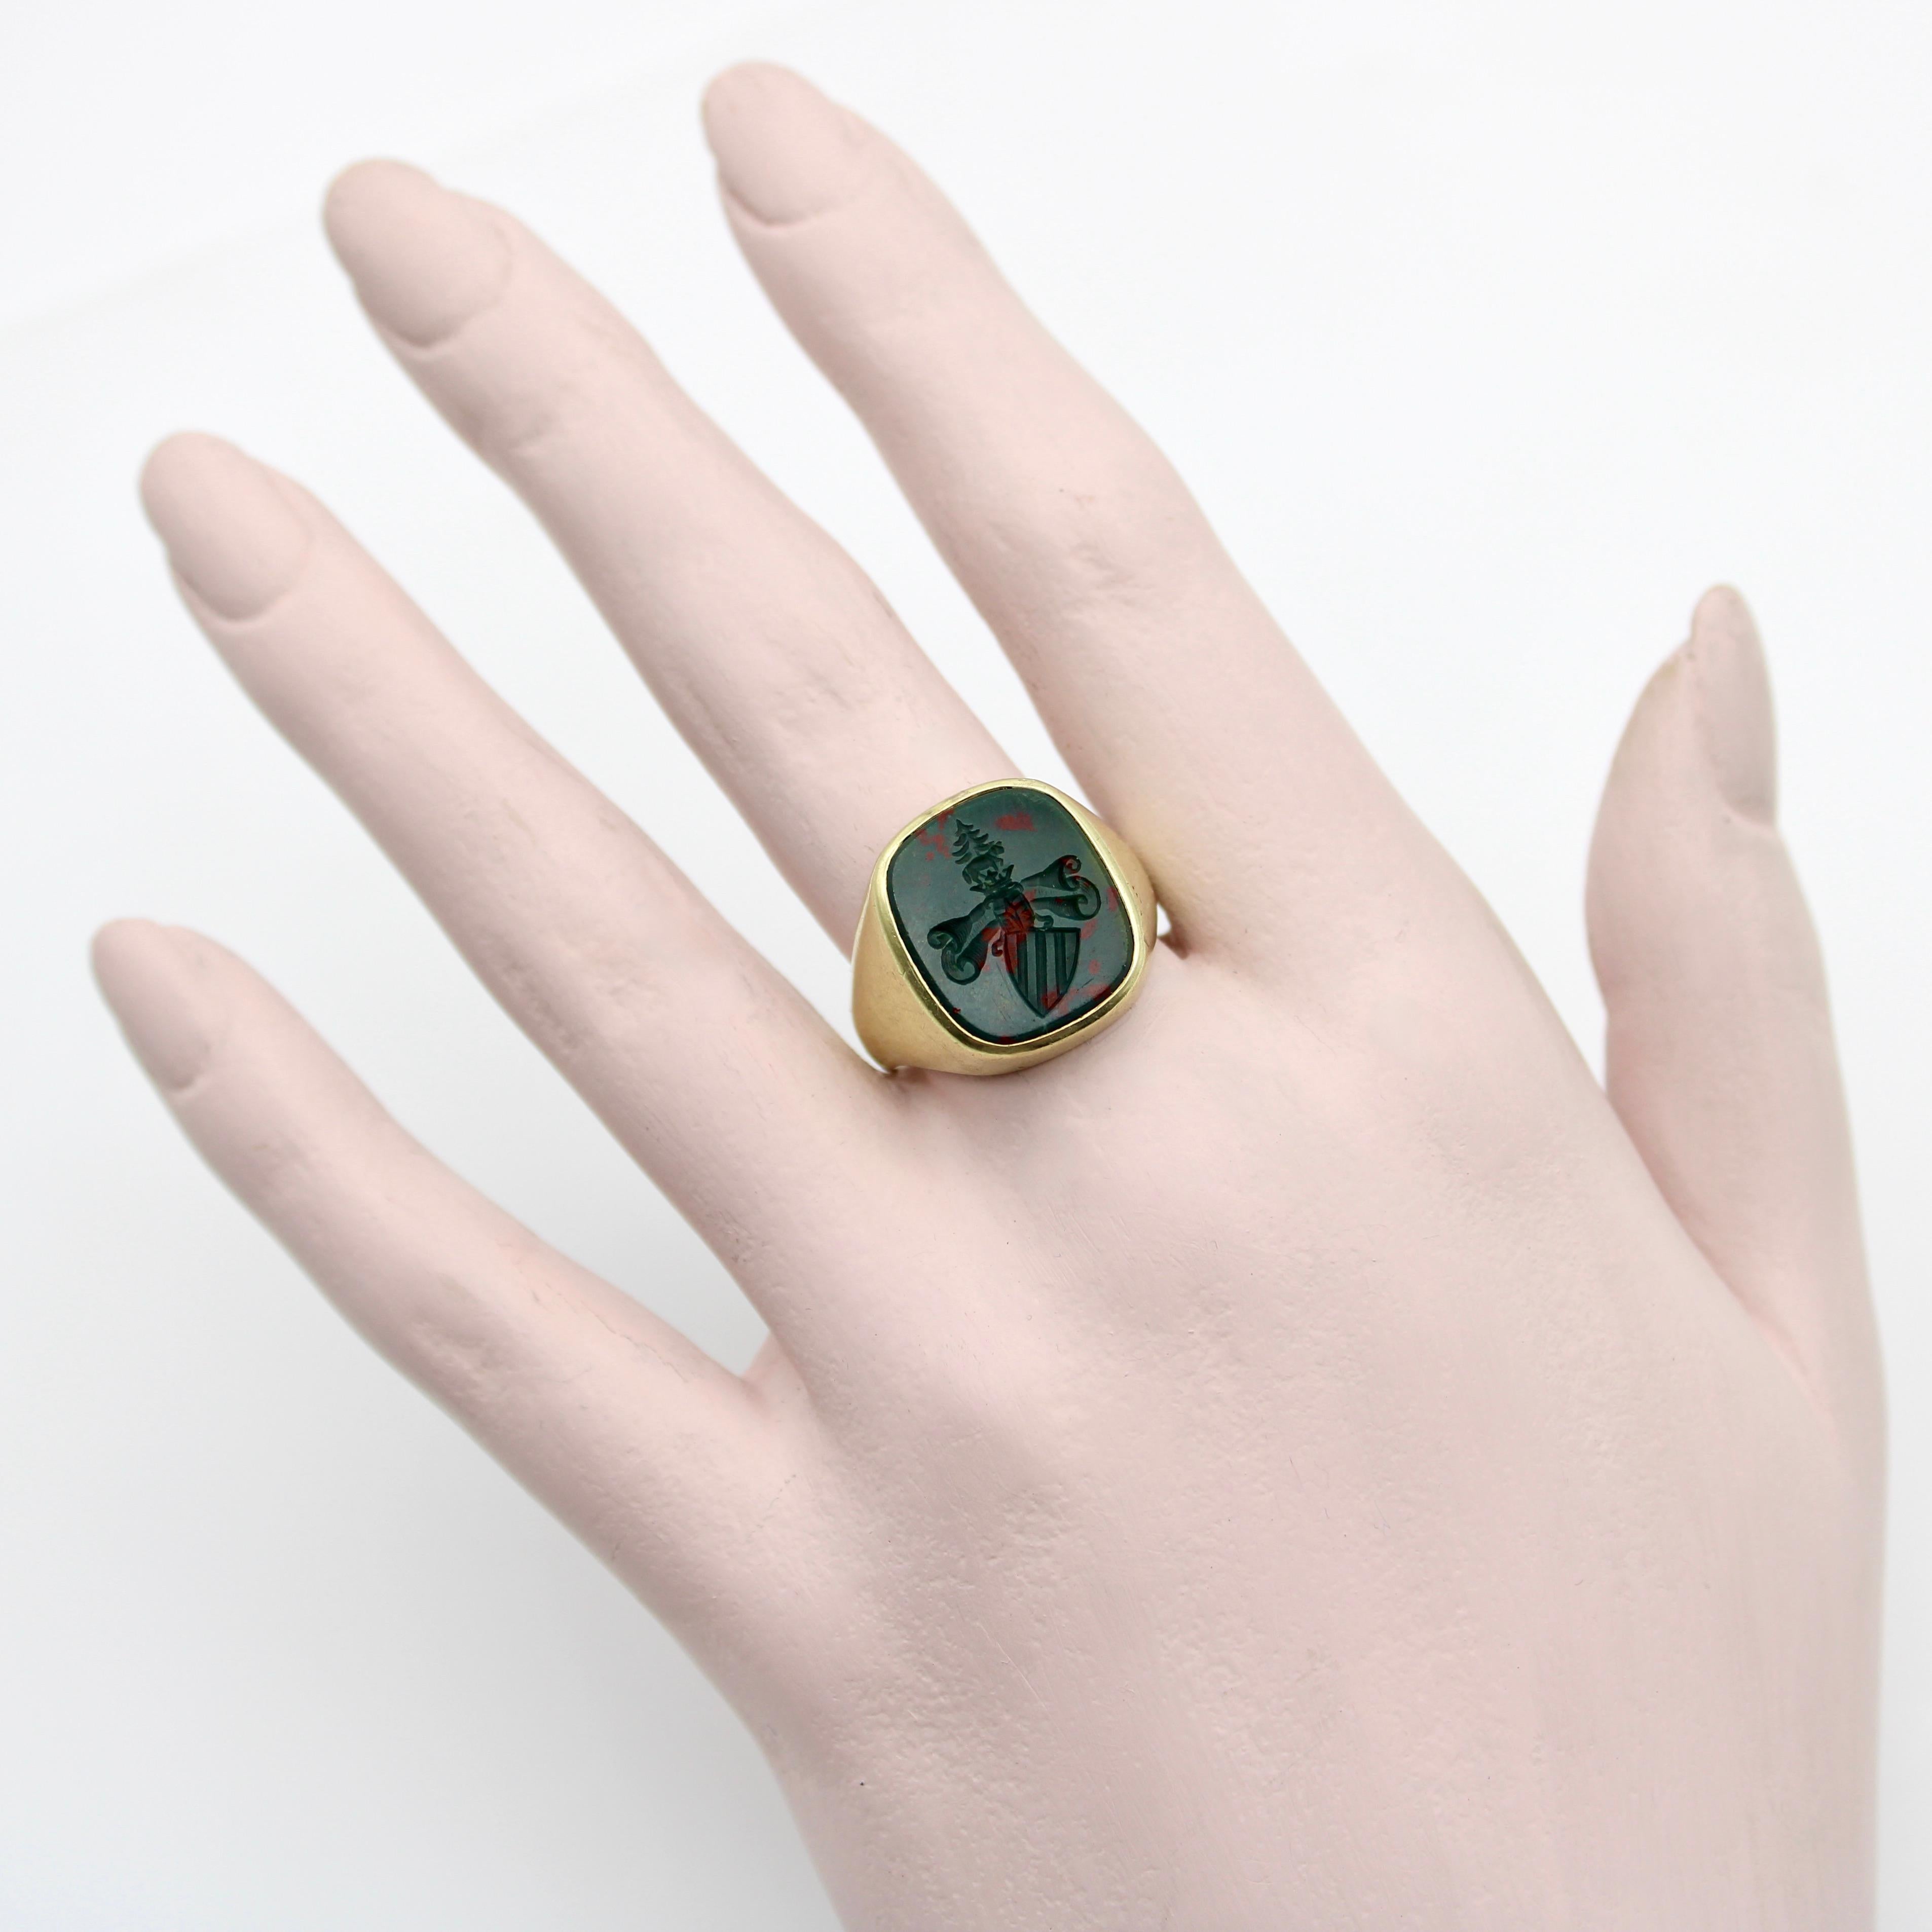 This 14k gold Edwardian intaglio signet ring contains an esoteric image—a unique family crest with mysterious imagery. Carved into bloodstone, a striped shield sits on a diagonal, with a scroll looming above it. It is topped with a crown, a pine